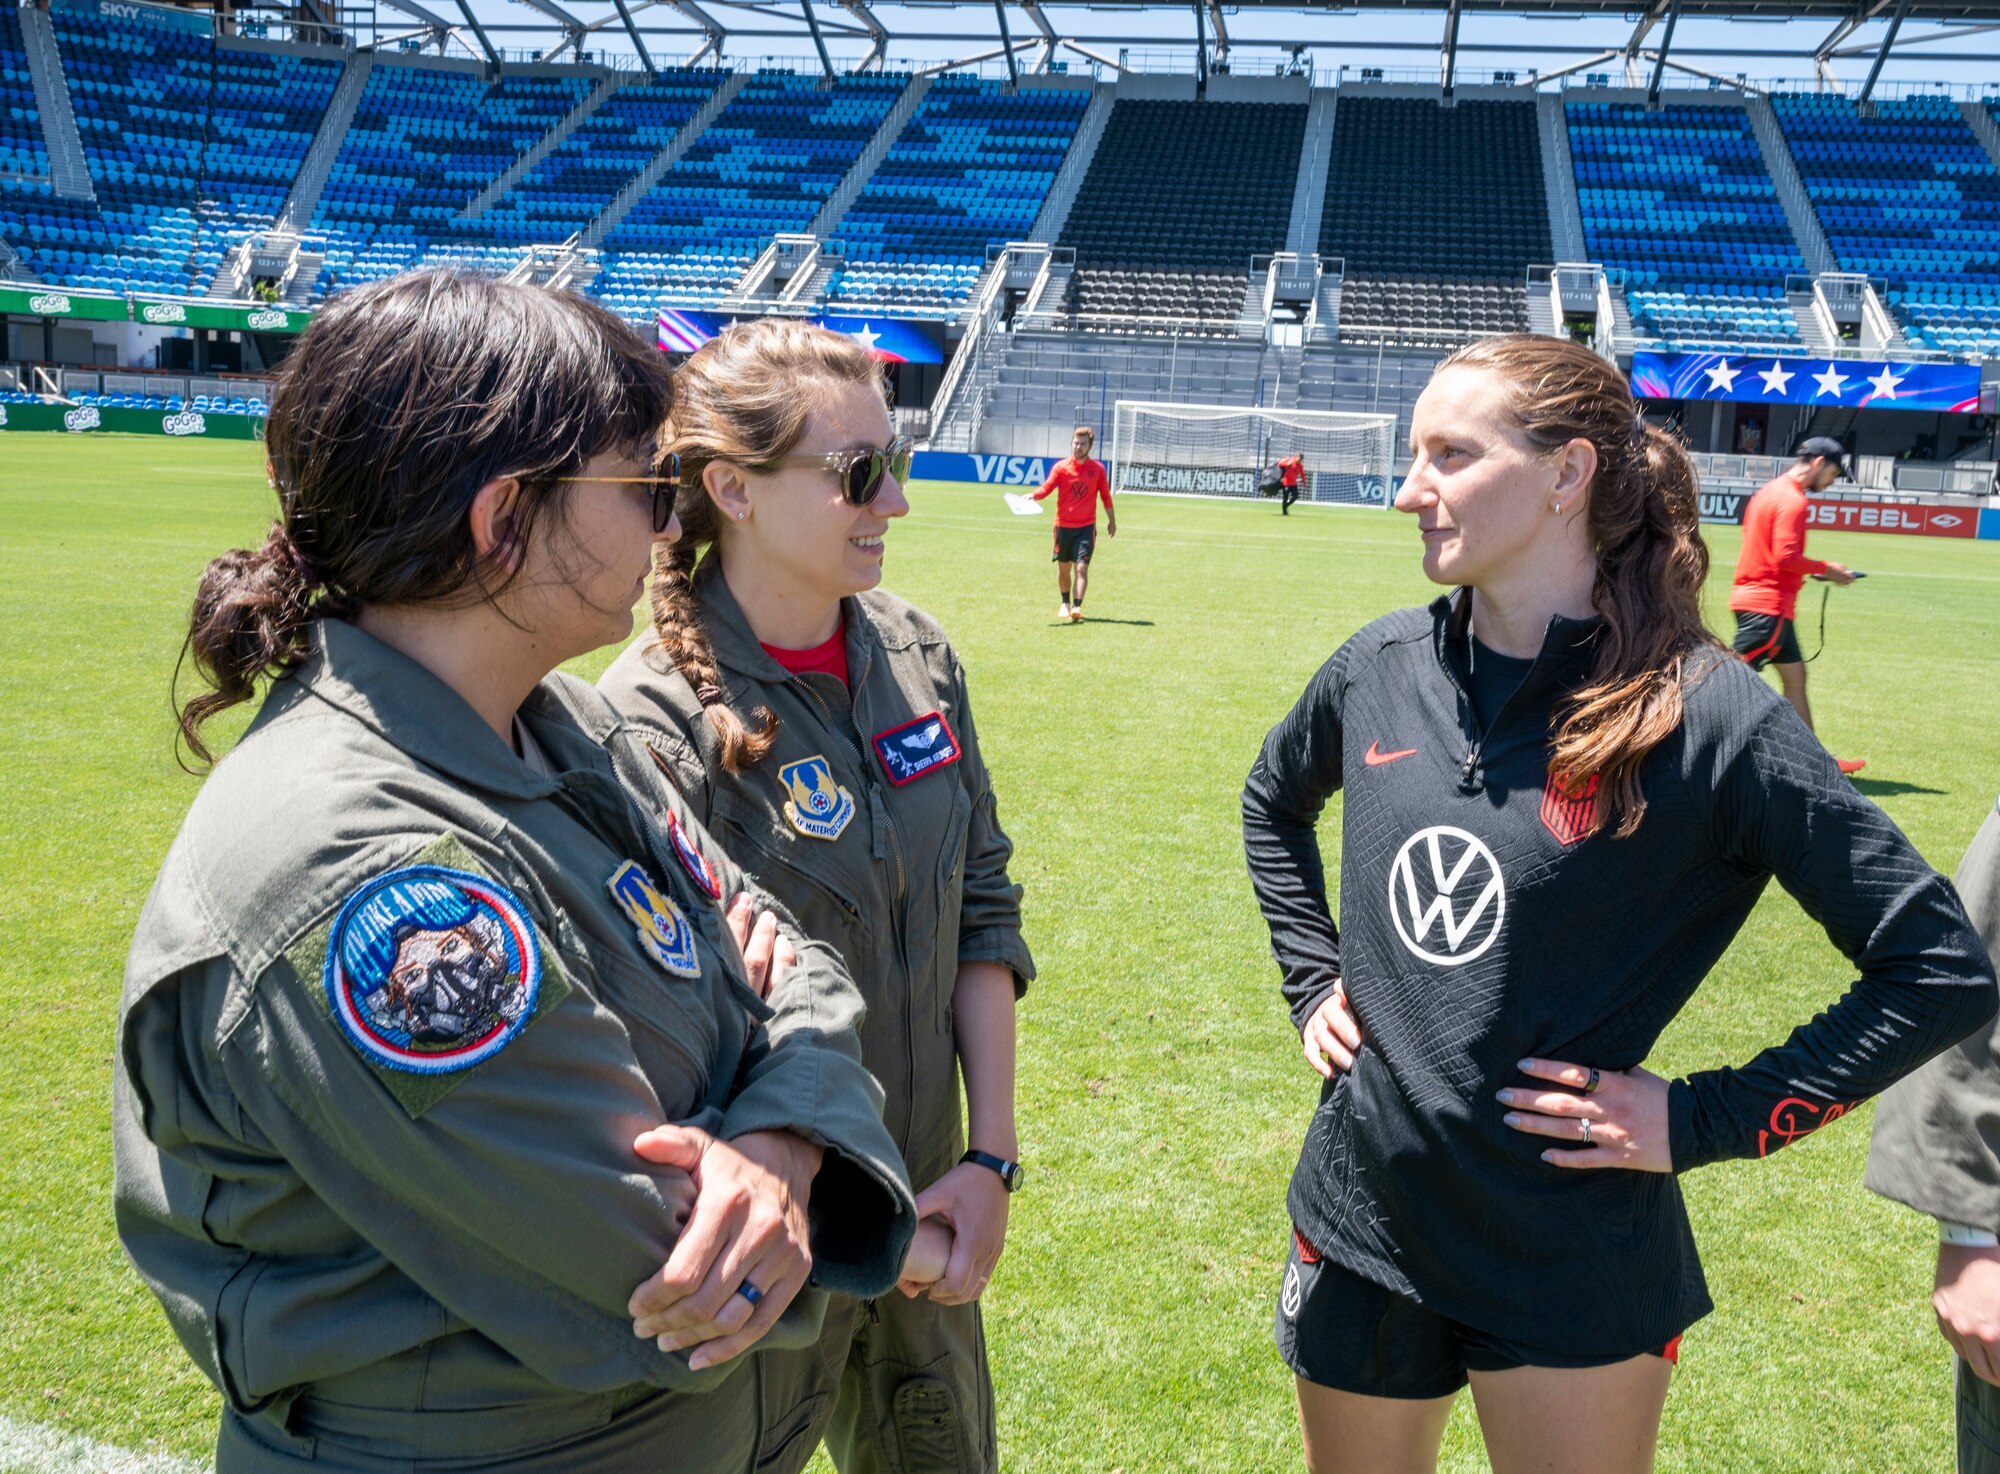 Kaitlyn Steigerwald, 412th Test Wing Public Affairs and Rebecca Aronoff, 420th Flight Test Squadron speak to a National Women's Soccer League player at PayPal Park, July 8. Team Edwards sent an all female crew from the 412th Operations Group to conduct a special flyover for the National Women's Soccer League at PayPal Park July 9 in San Jose, California.